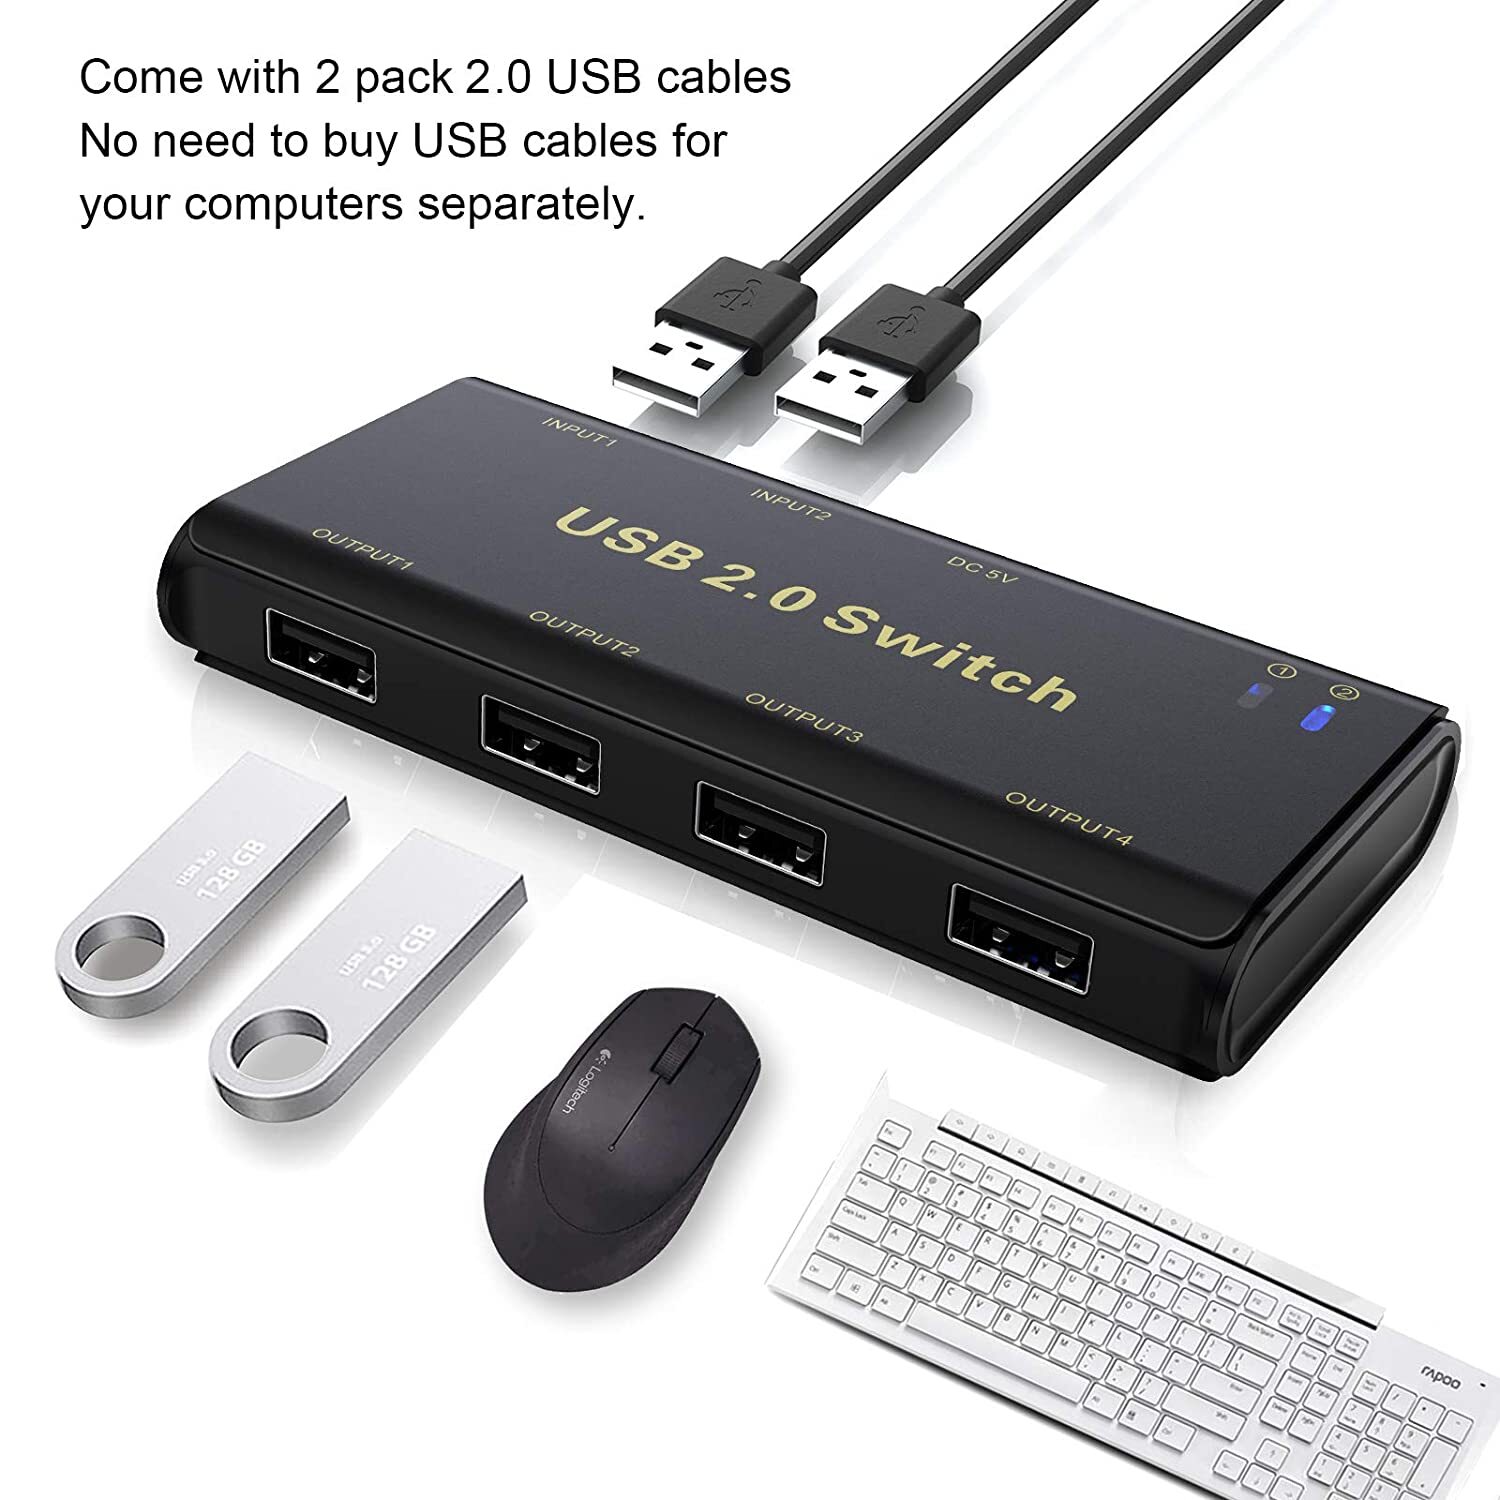 Scanner Printer PCs with One-Button Swapping EYOOLD USB Switch Selector 2 Computers Sharing 4 USB Devices USB 2.0 Peripheral Switcher Box Hub for Mouse Keyboard 